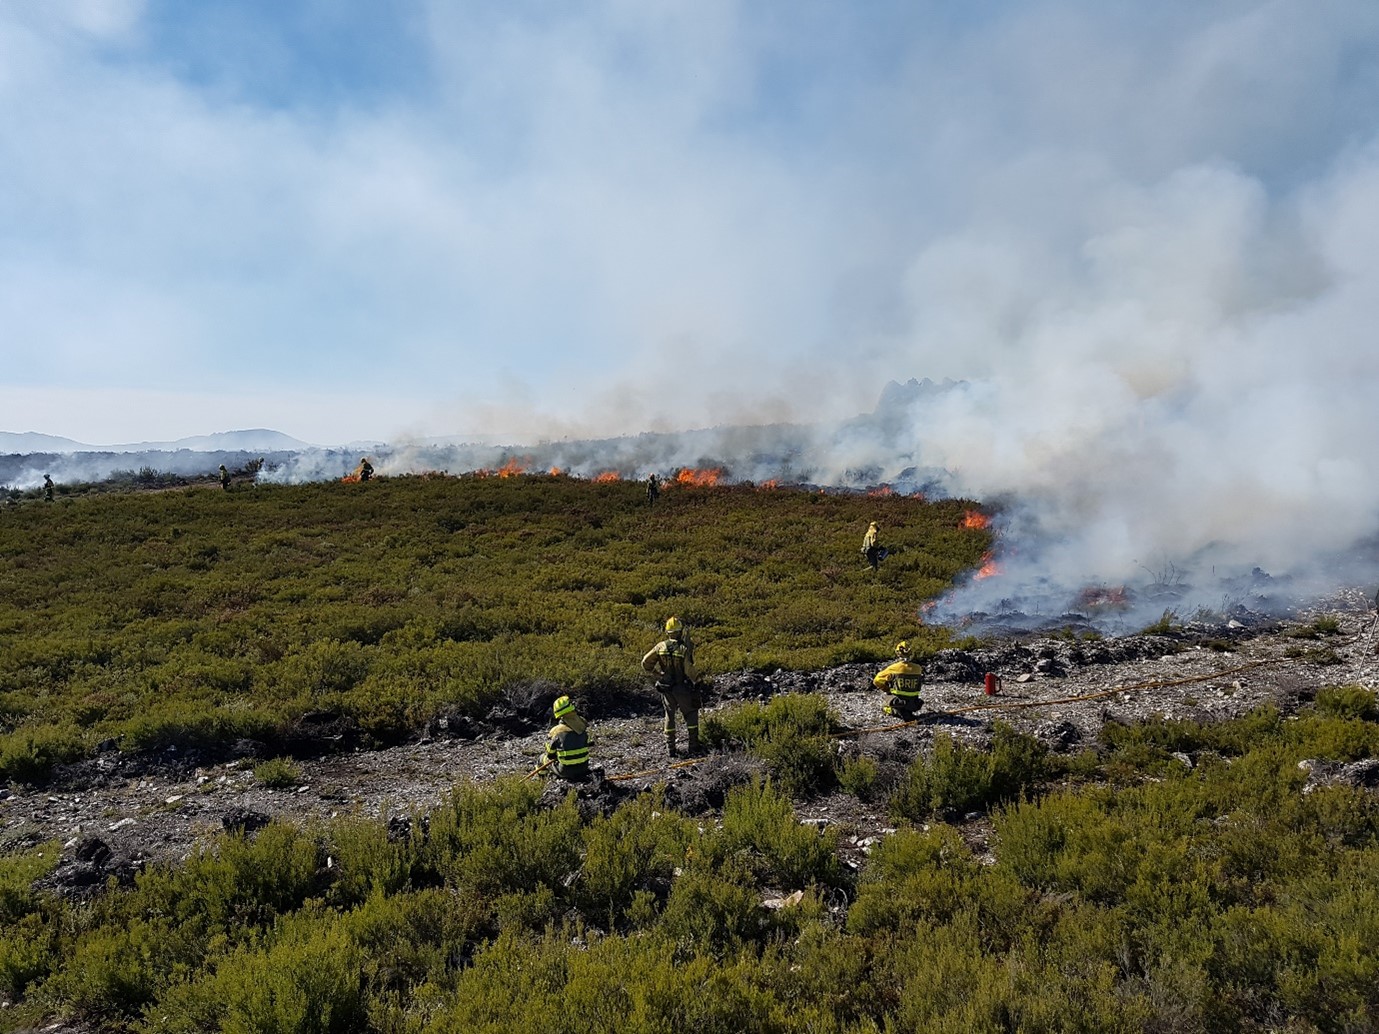 Prescribed burning in Spain during the fall to control fuel load